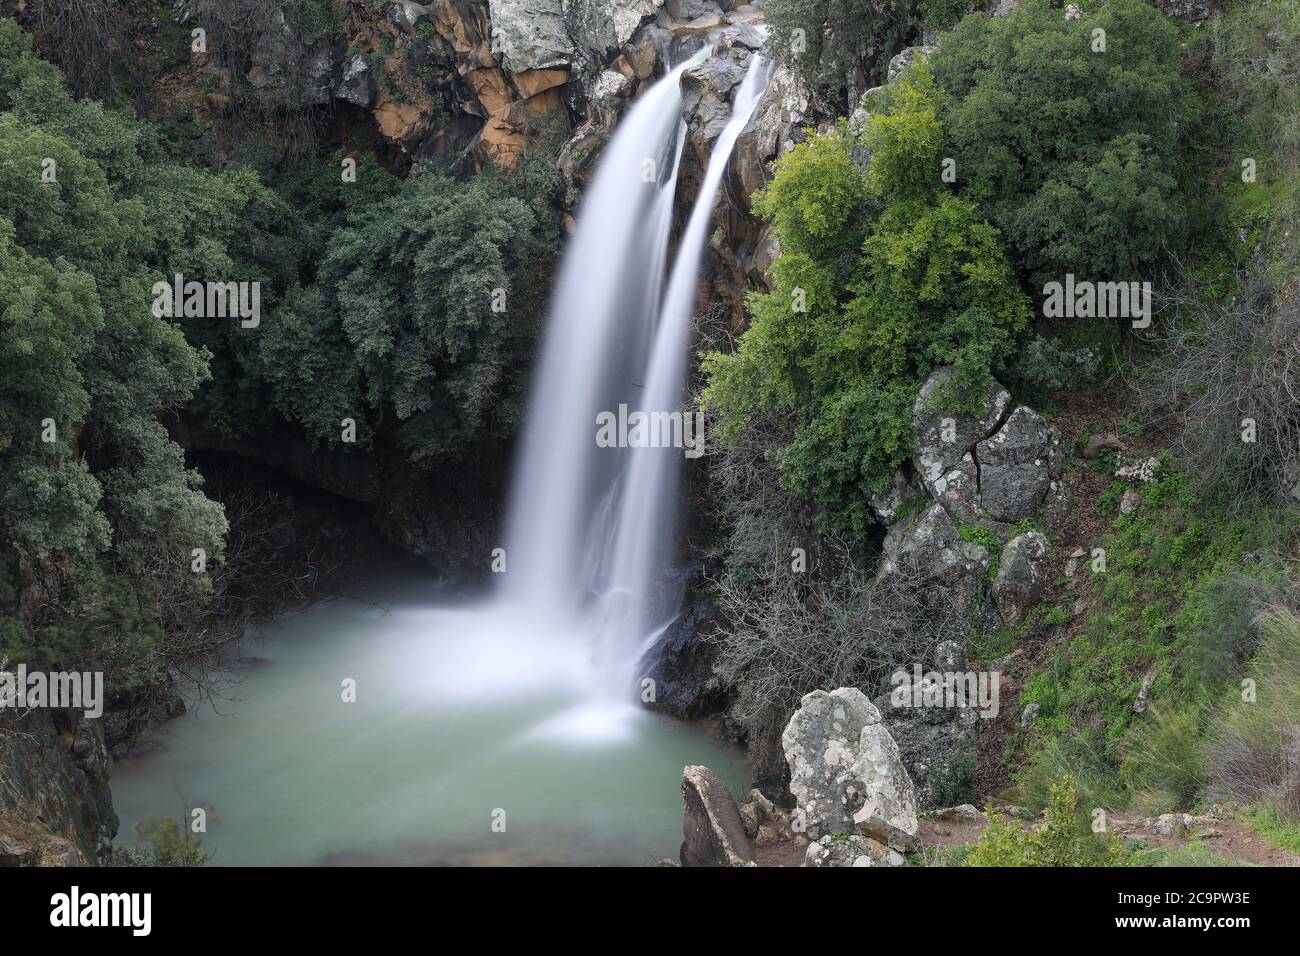 High waterfall and greenery all around. Long exposure photography. Saar waterfall at the Golan Heights. Stock Photo